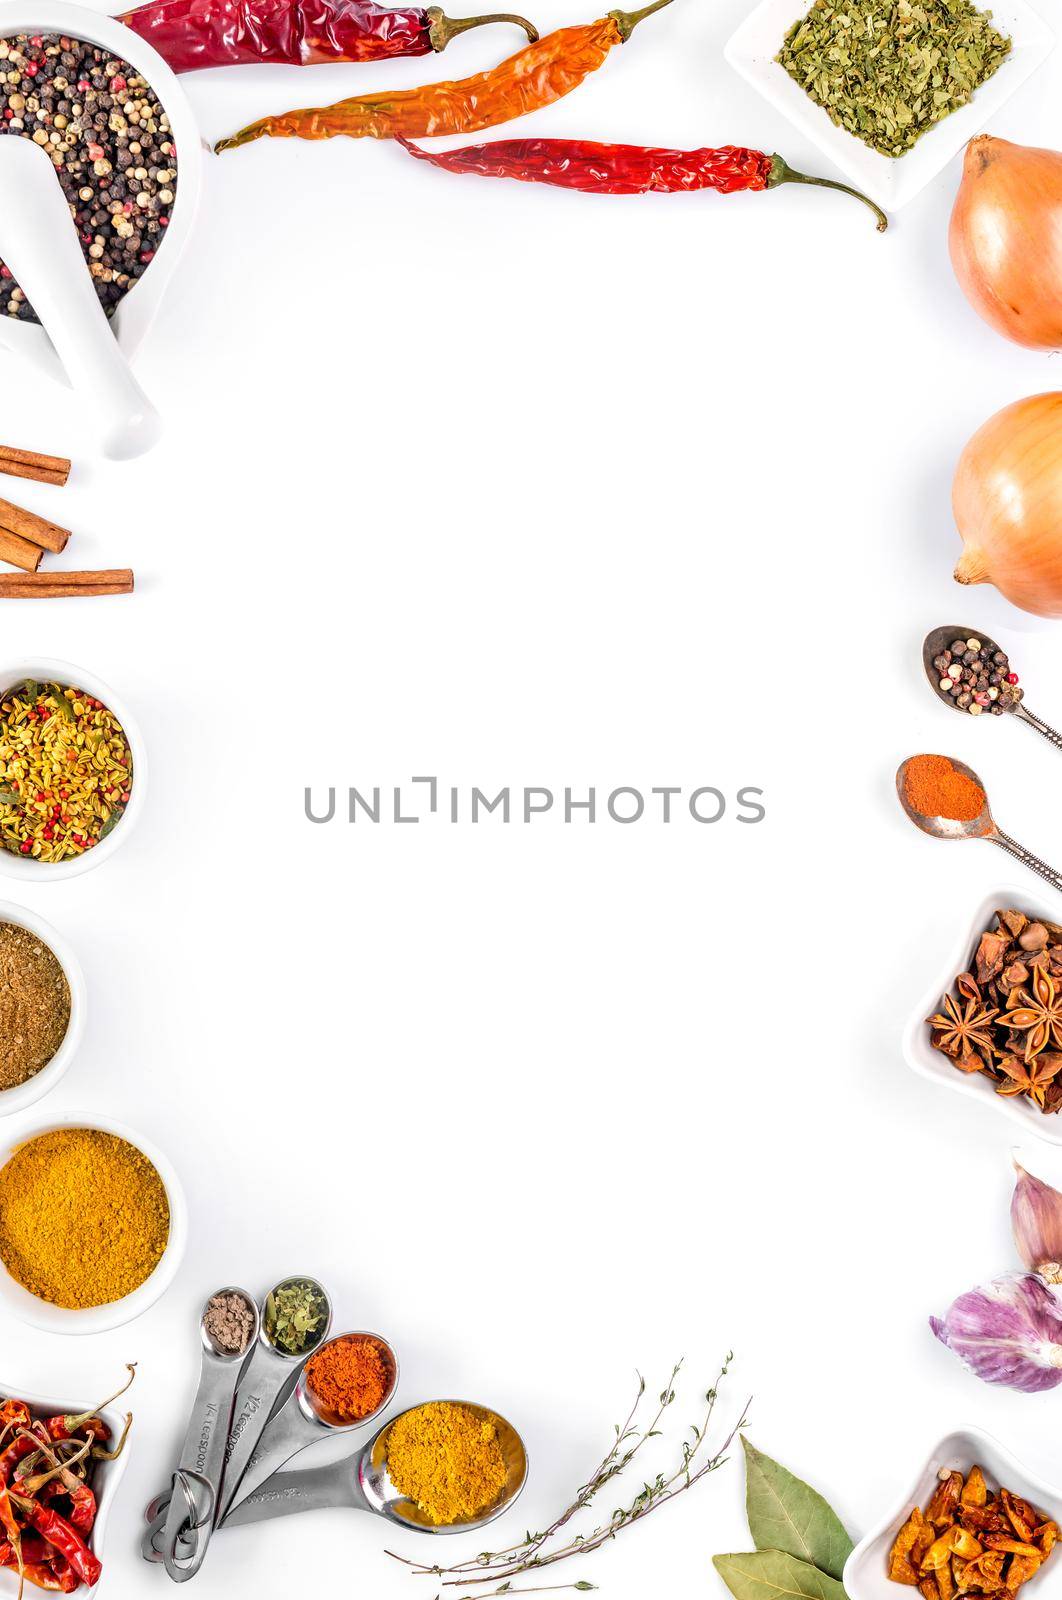 spices on white background isolated with place for text. view from above